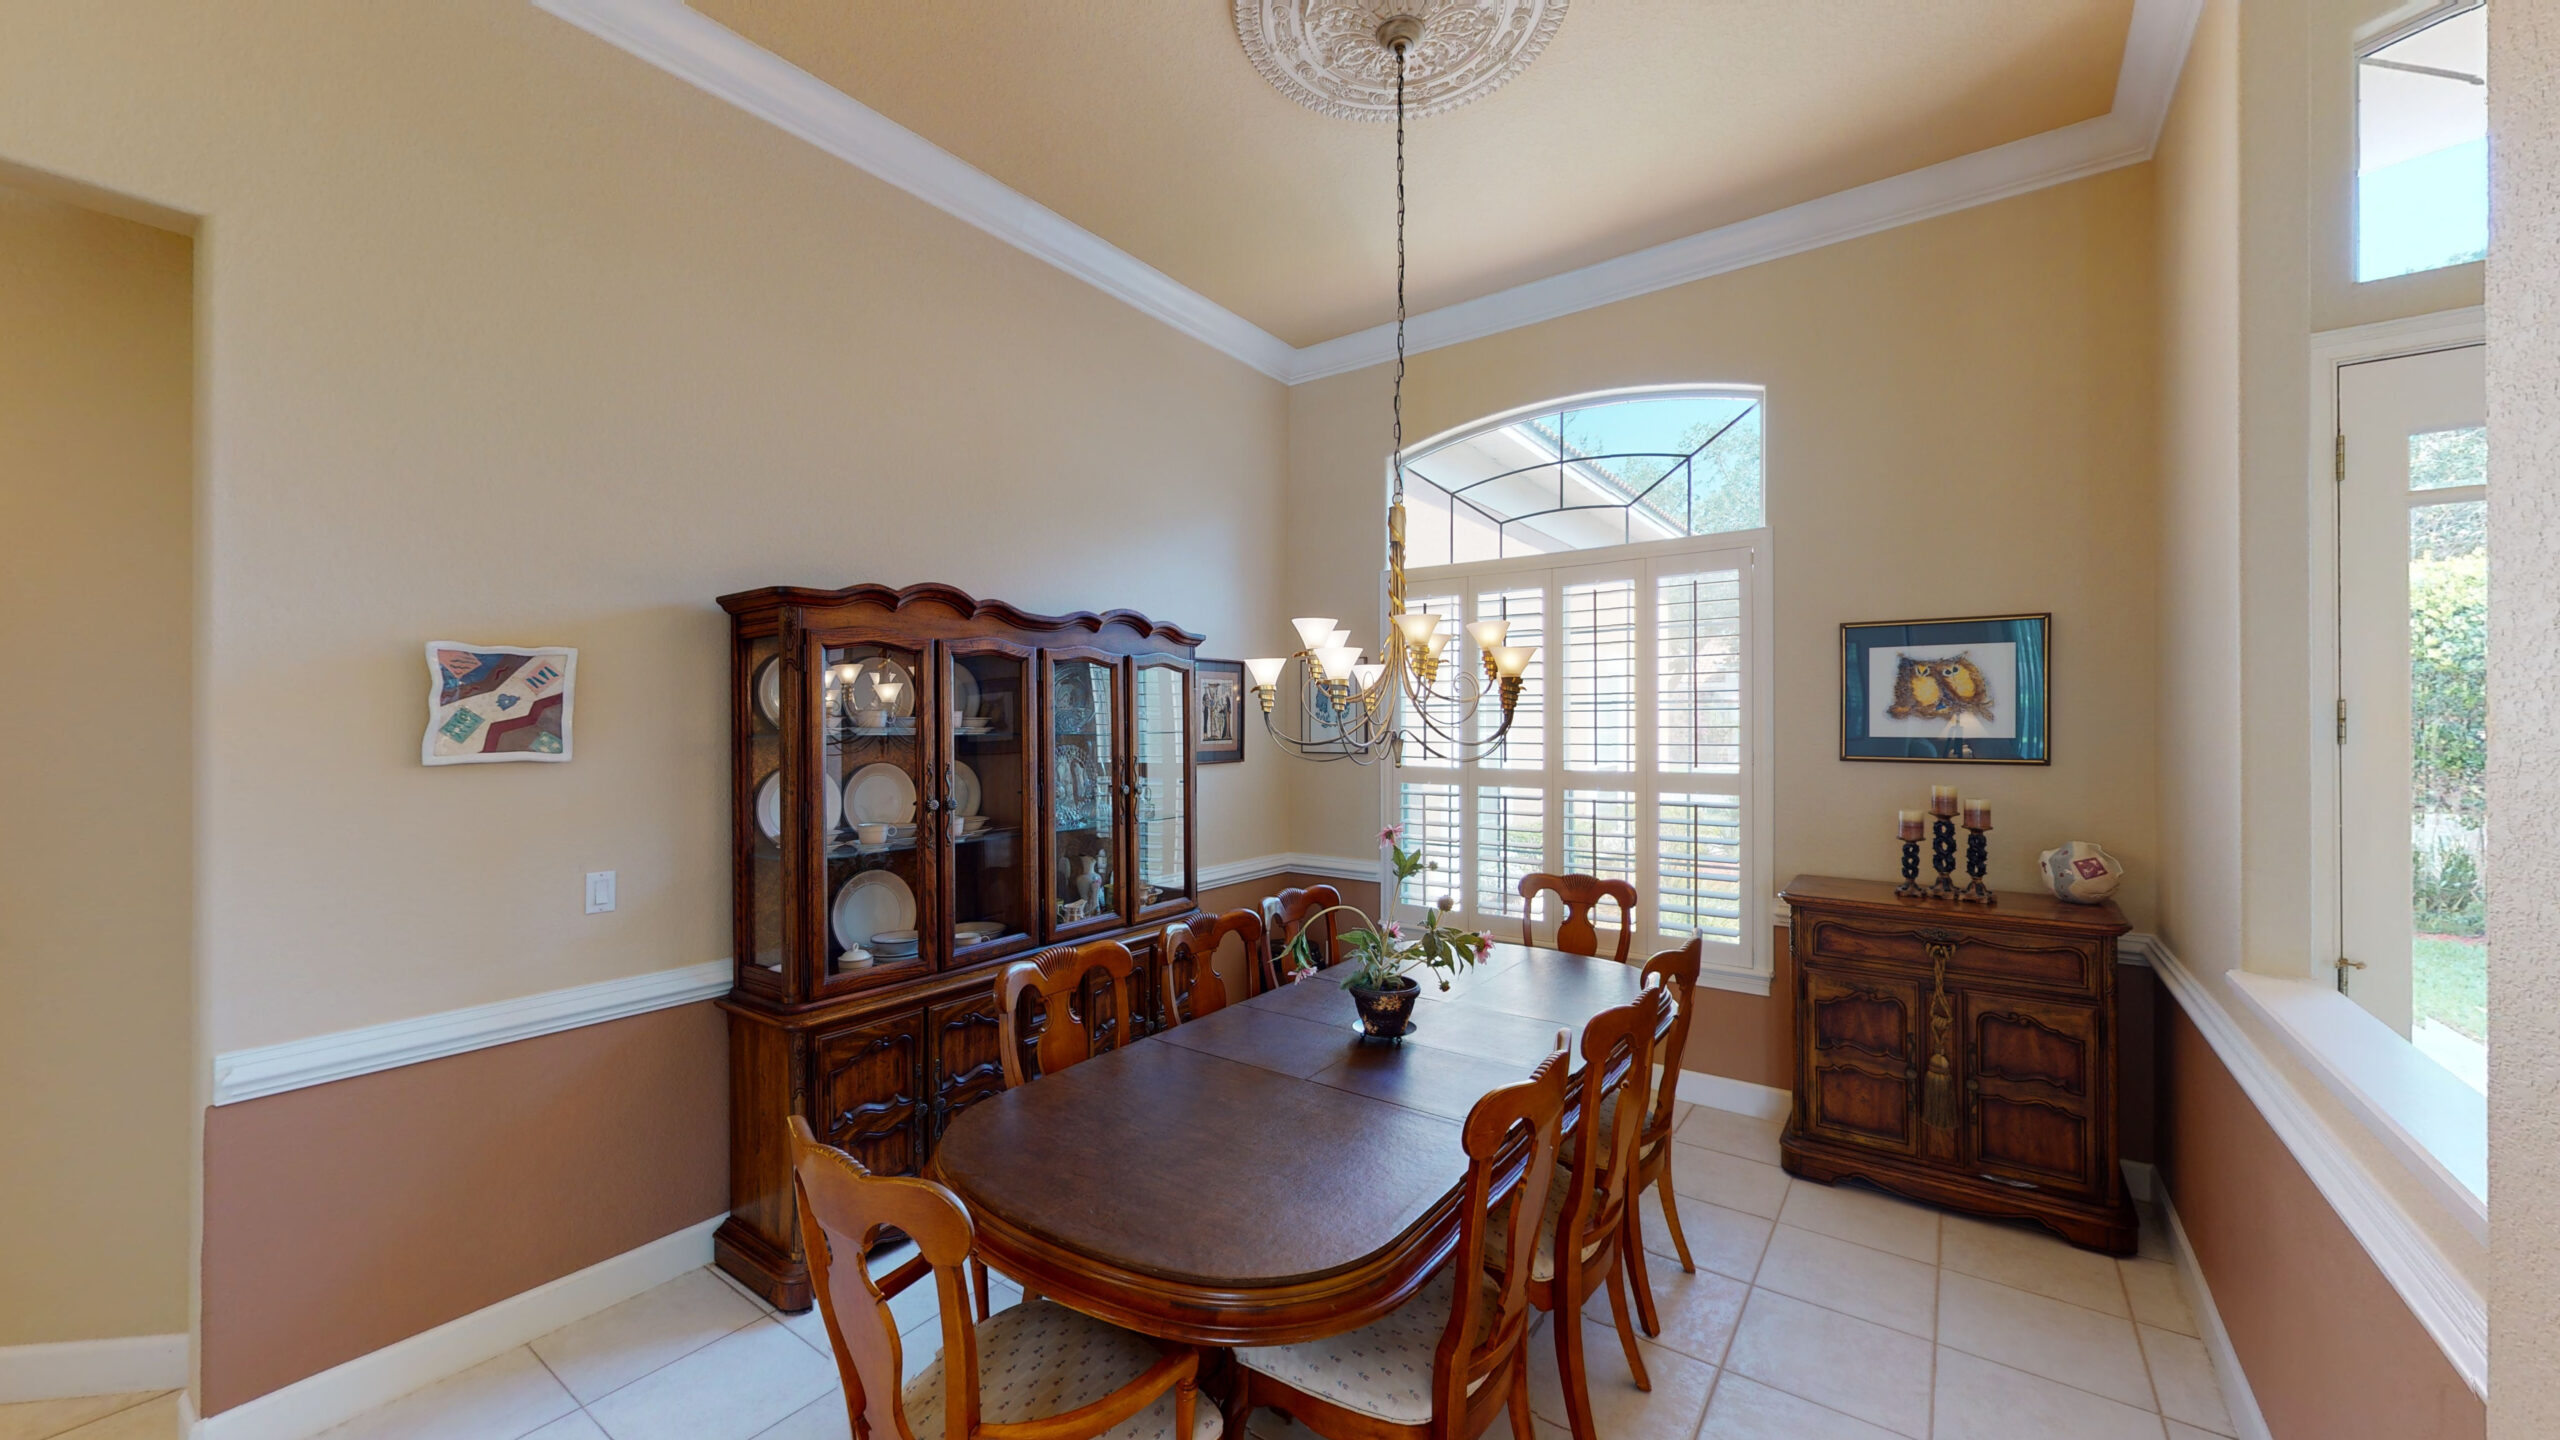 A dining area with wooden cabinets, chairs, and tables